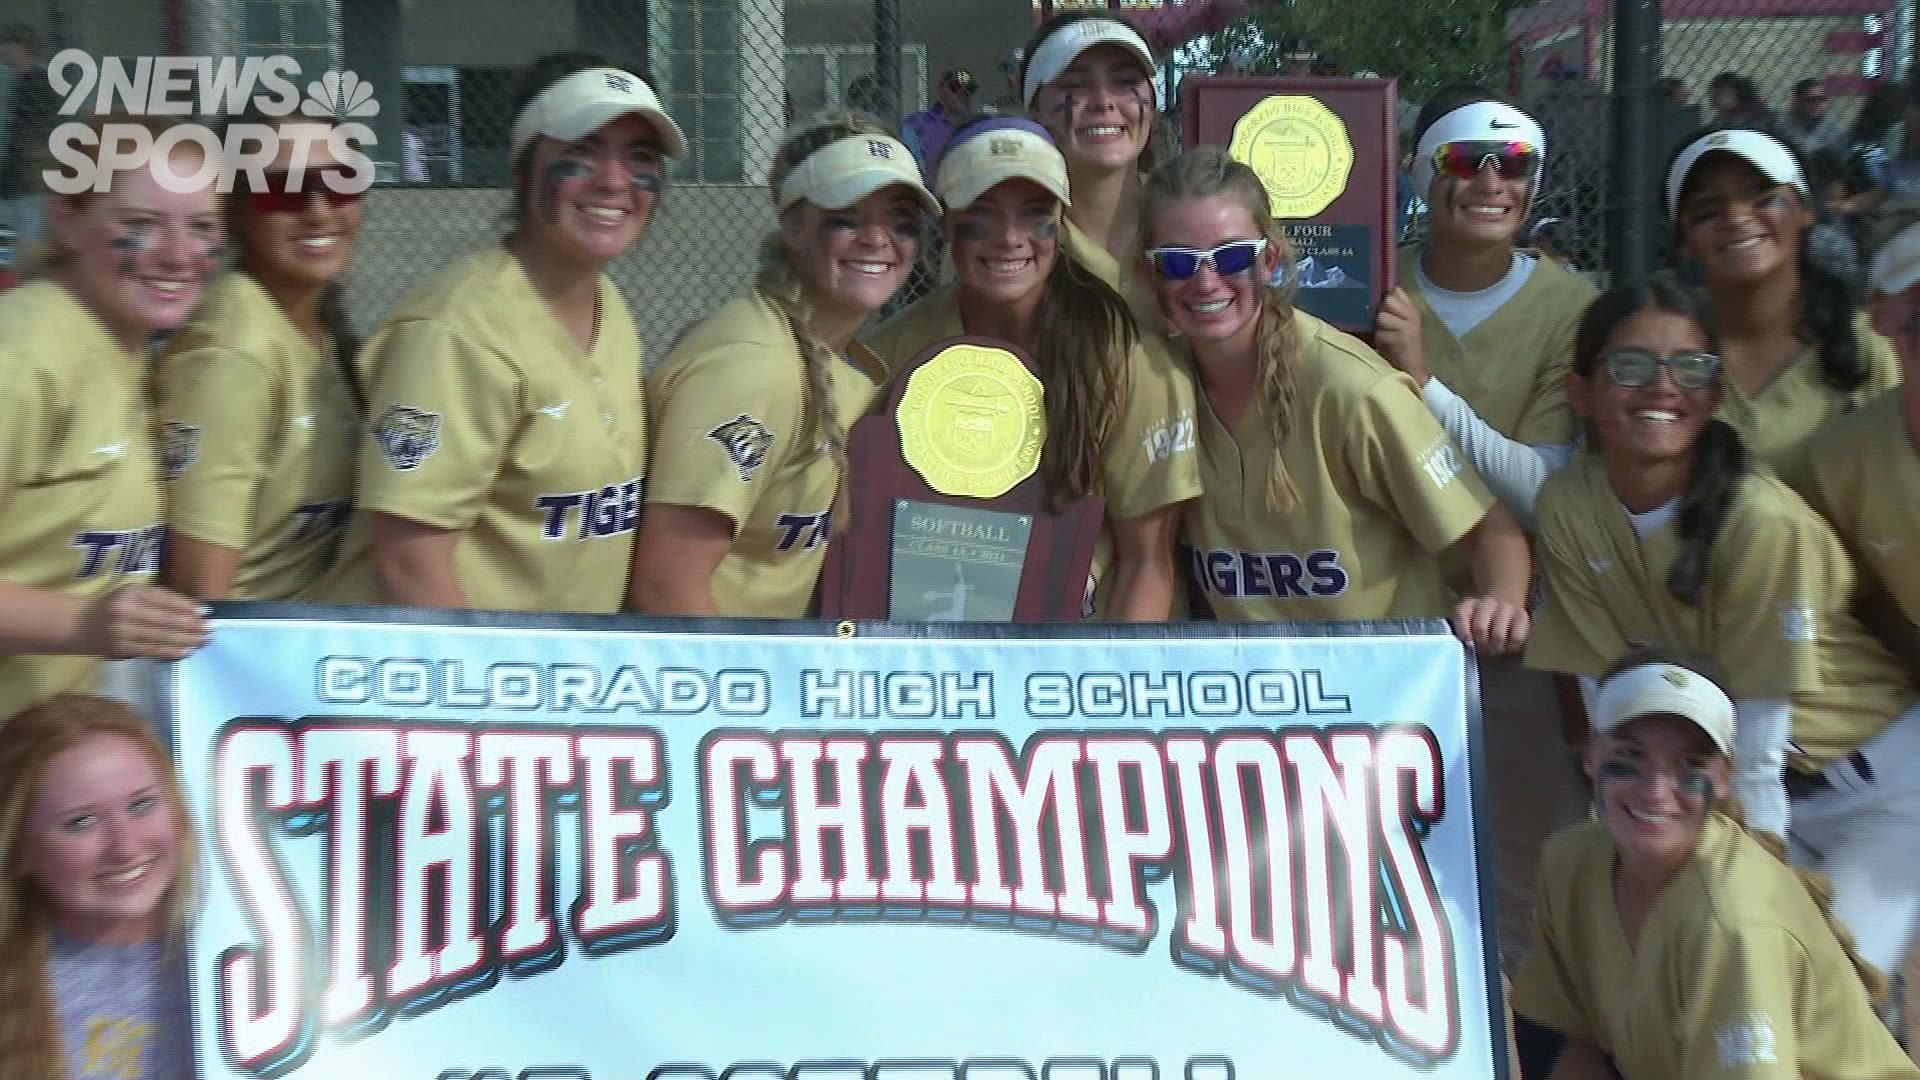 Kuszak, a senior softball shortstop for the Tigers, hit two home runs in the state championship to help propel Holy Family to its third title in four years.